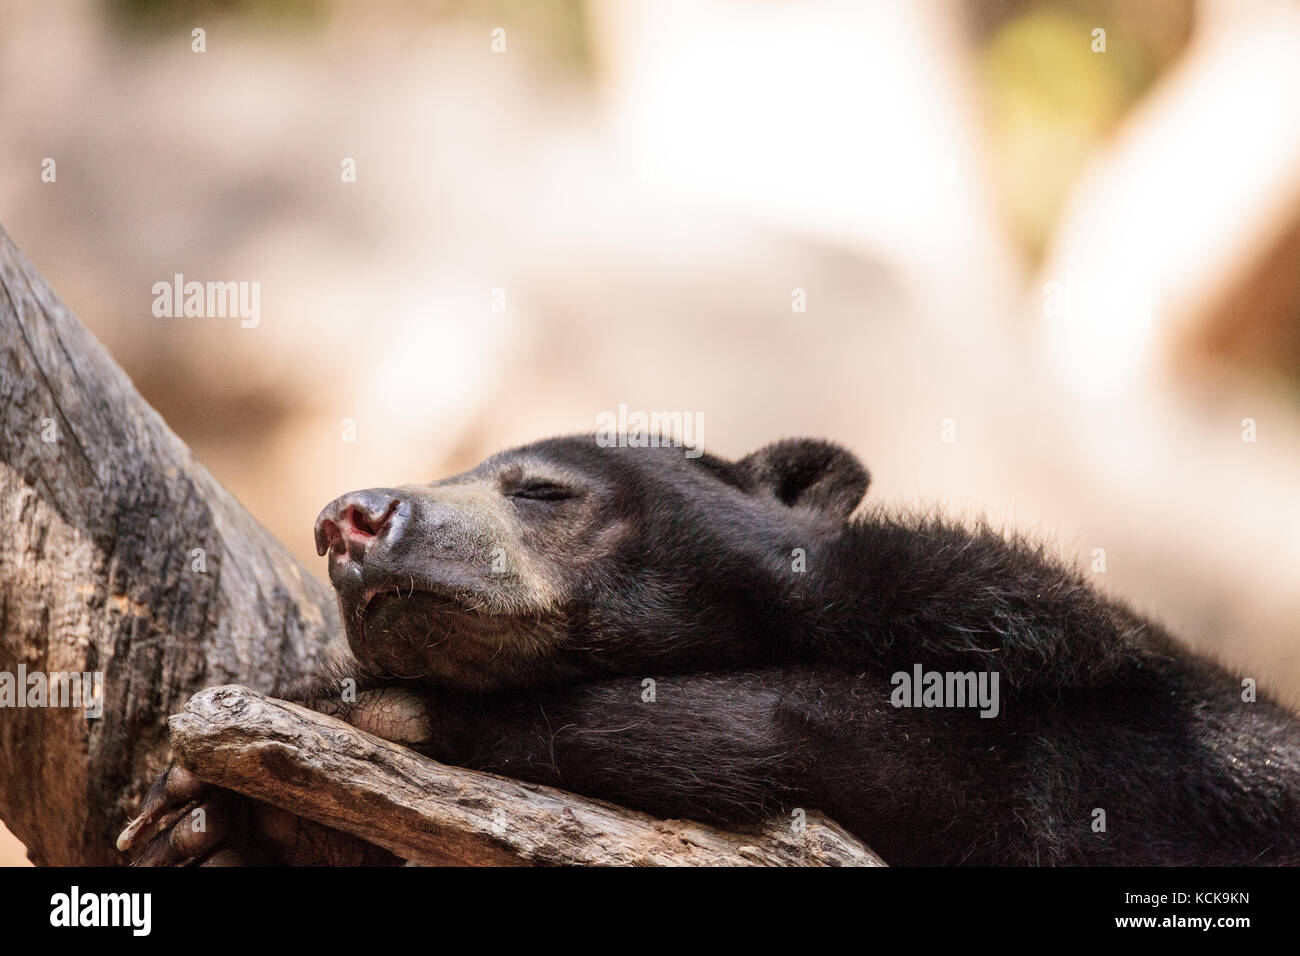 Sun bear Helarctos malayanus sleeps on a tree and is found in the tropical habitats of Southeast Asia. Stock Photo